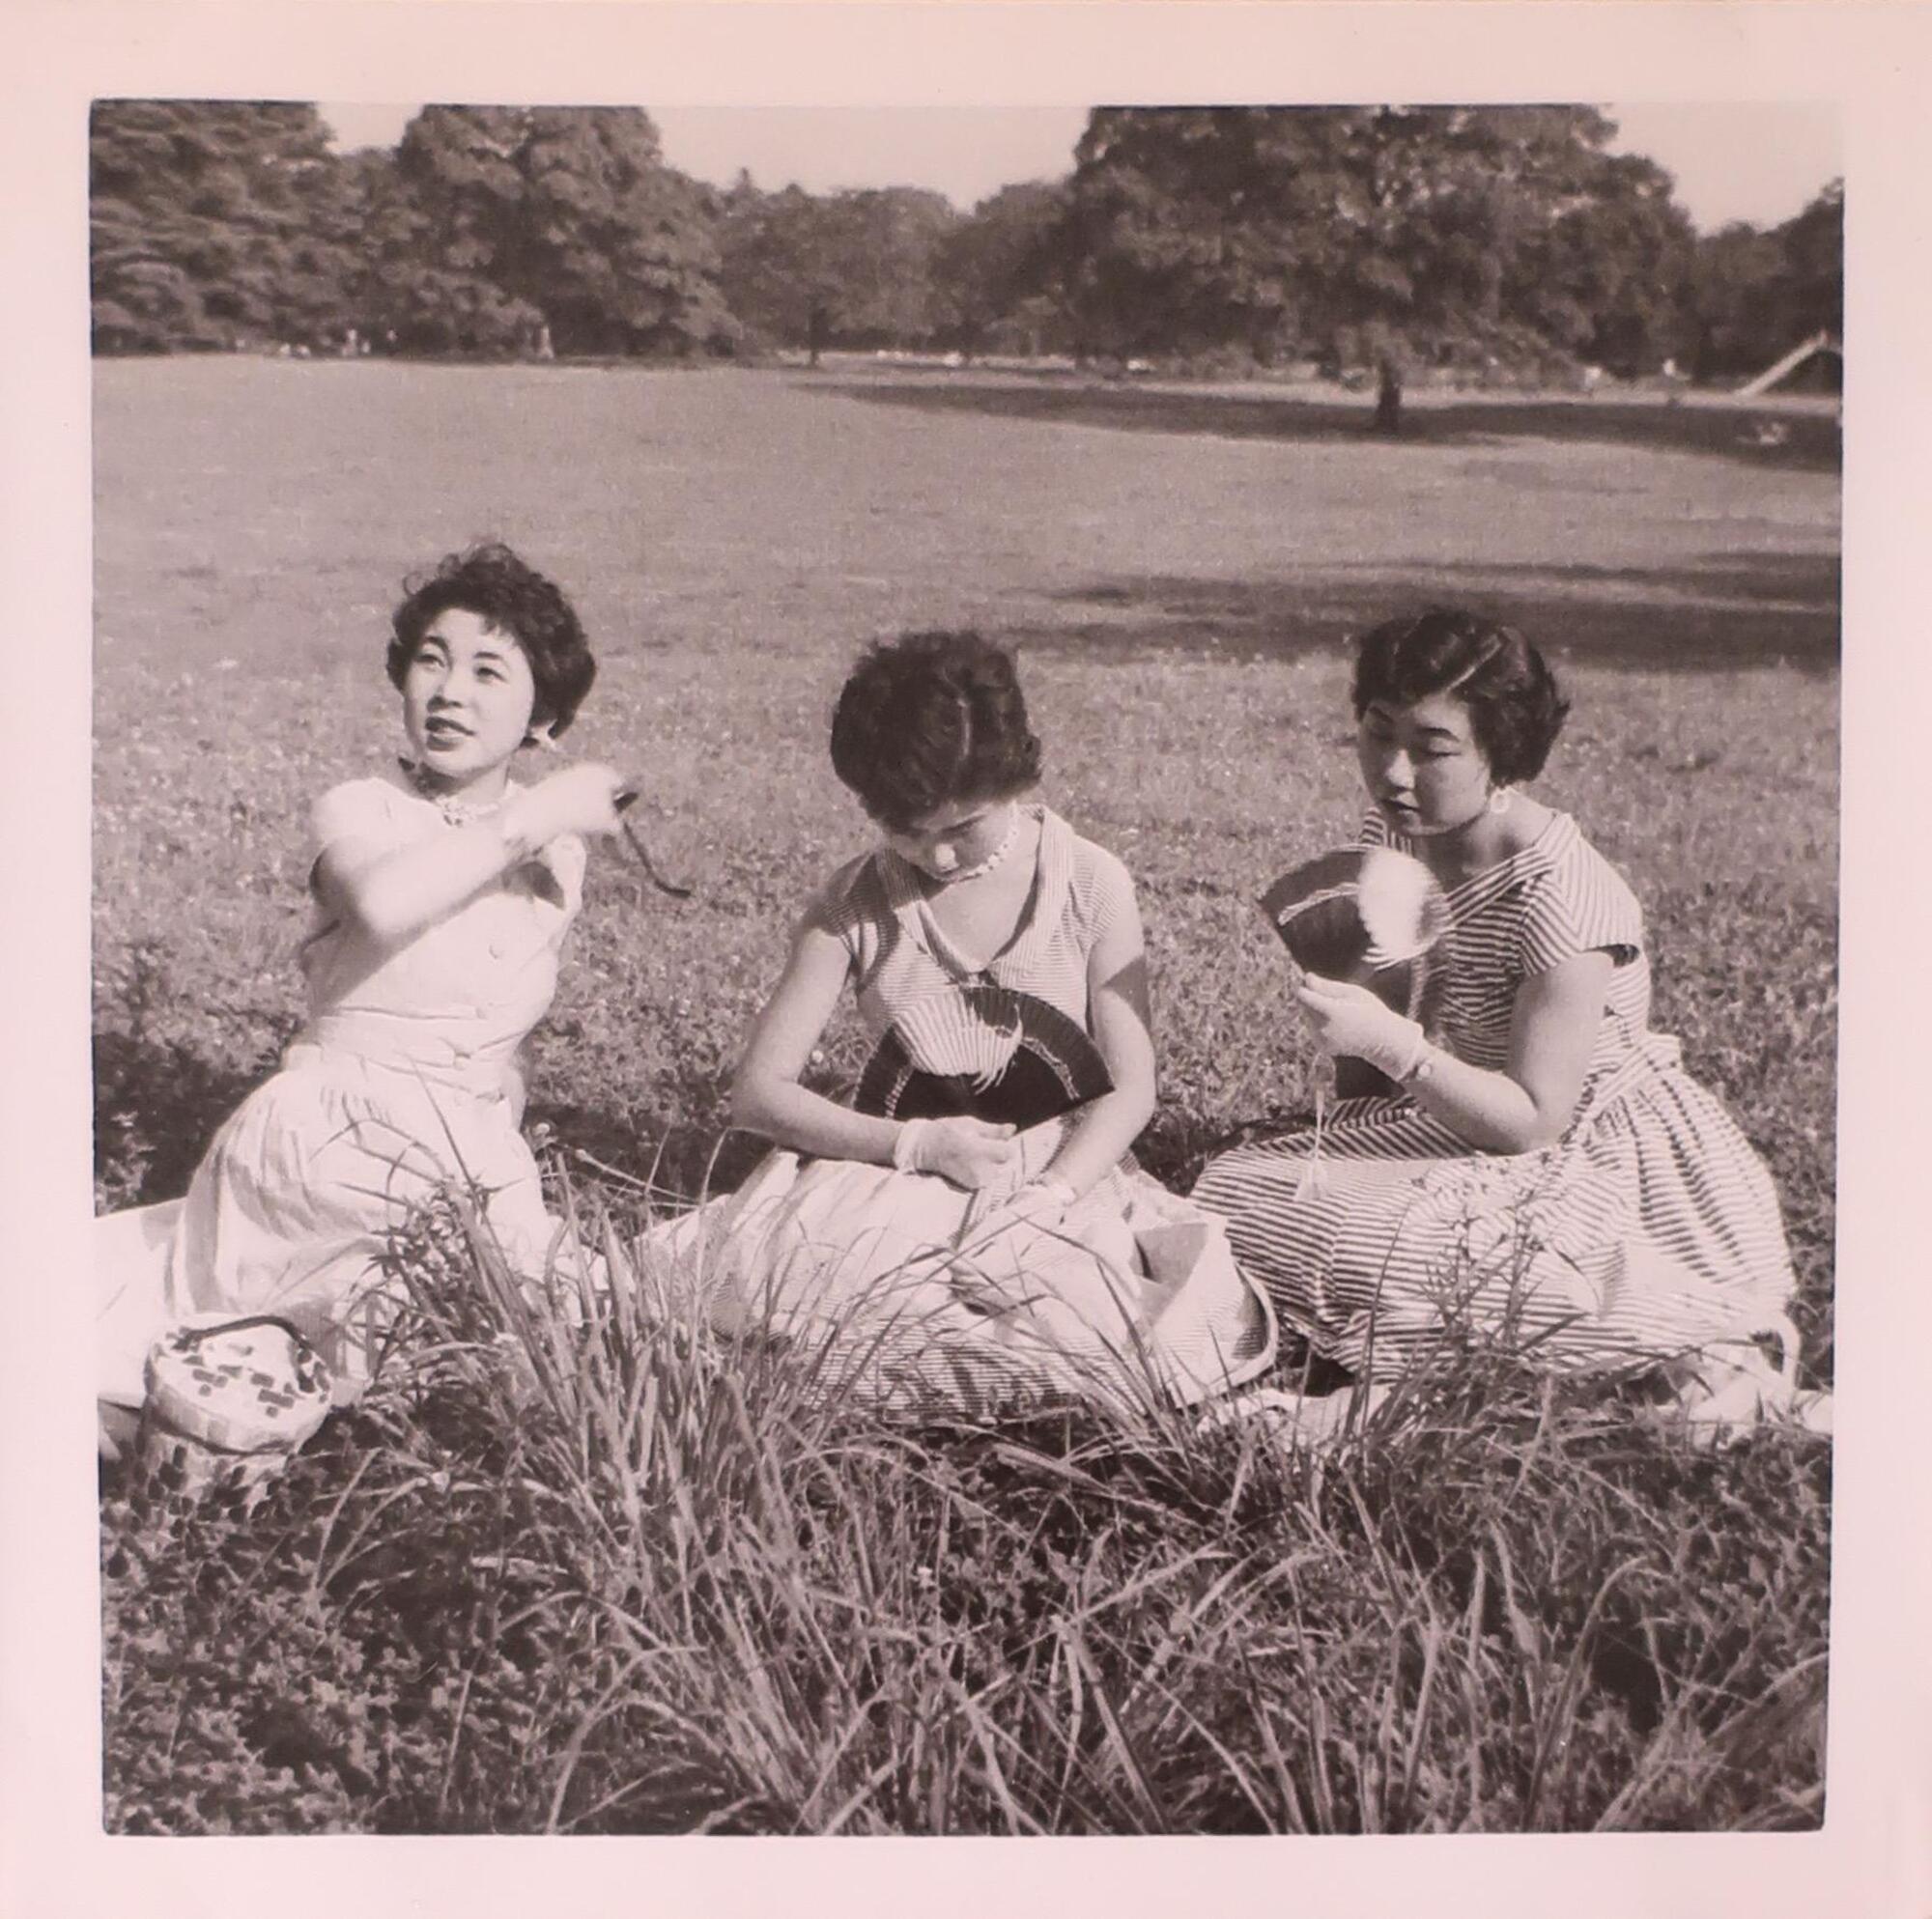 Three young women with short dark hair sitting in a field. The women on the right and in the middle hold fans in front of them. The woman on the left looks up towards the left side of the image and has her mouth slightly open as though speaking.